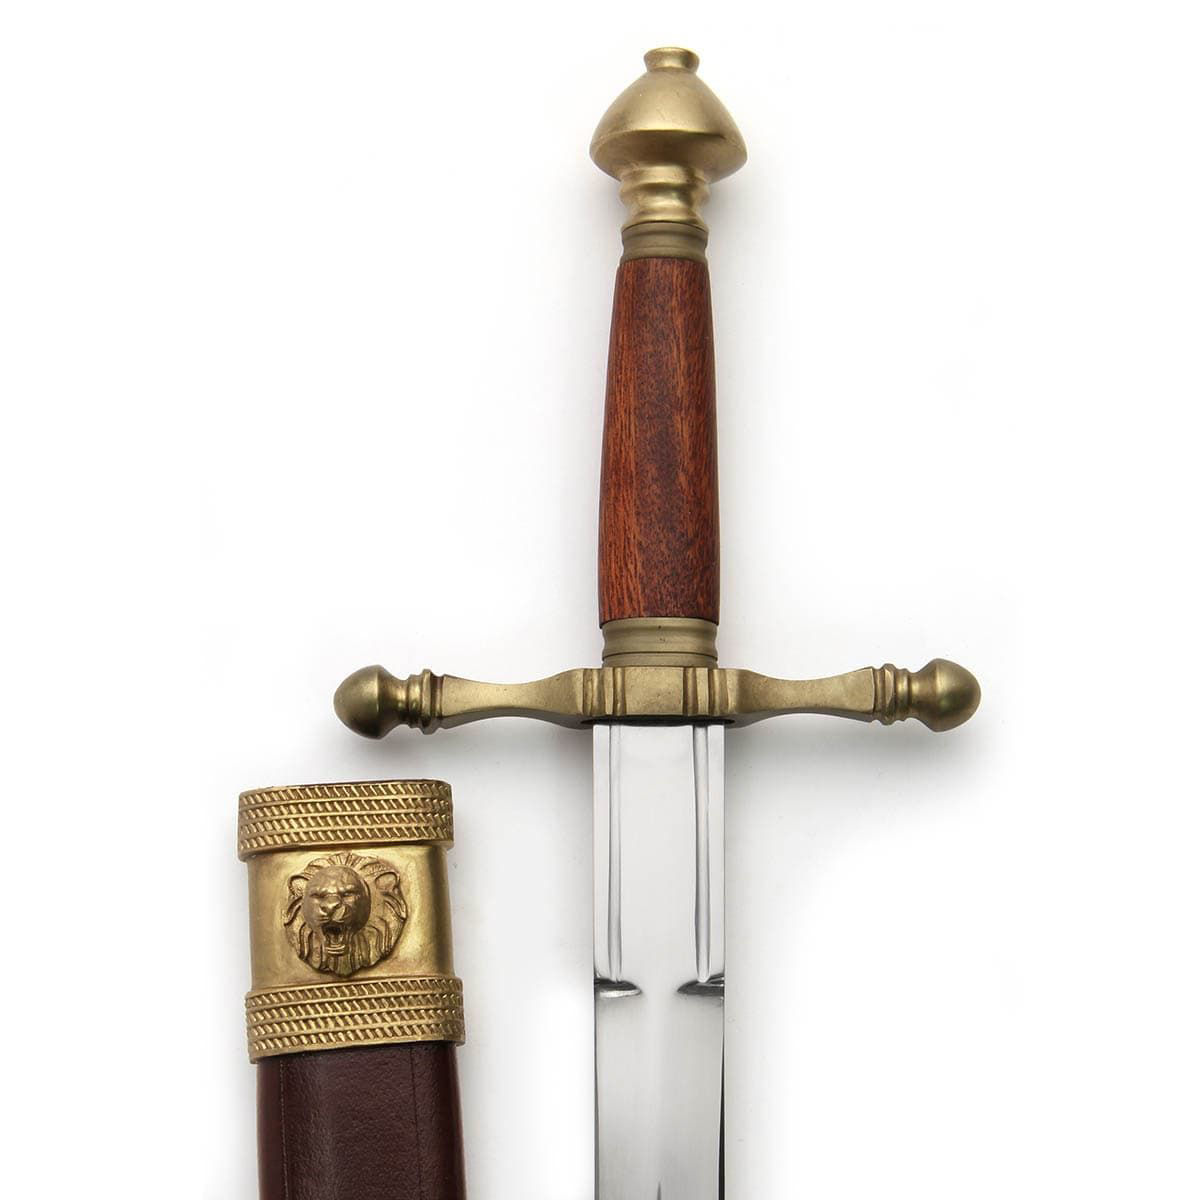 Bramham Moor Medieval Dagger by Windlass has high carbon steel blade, wood grip and matte brass guard and pommel